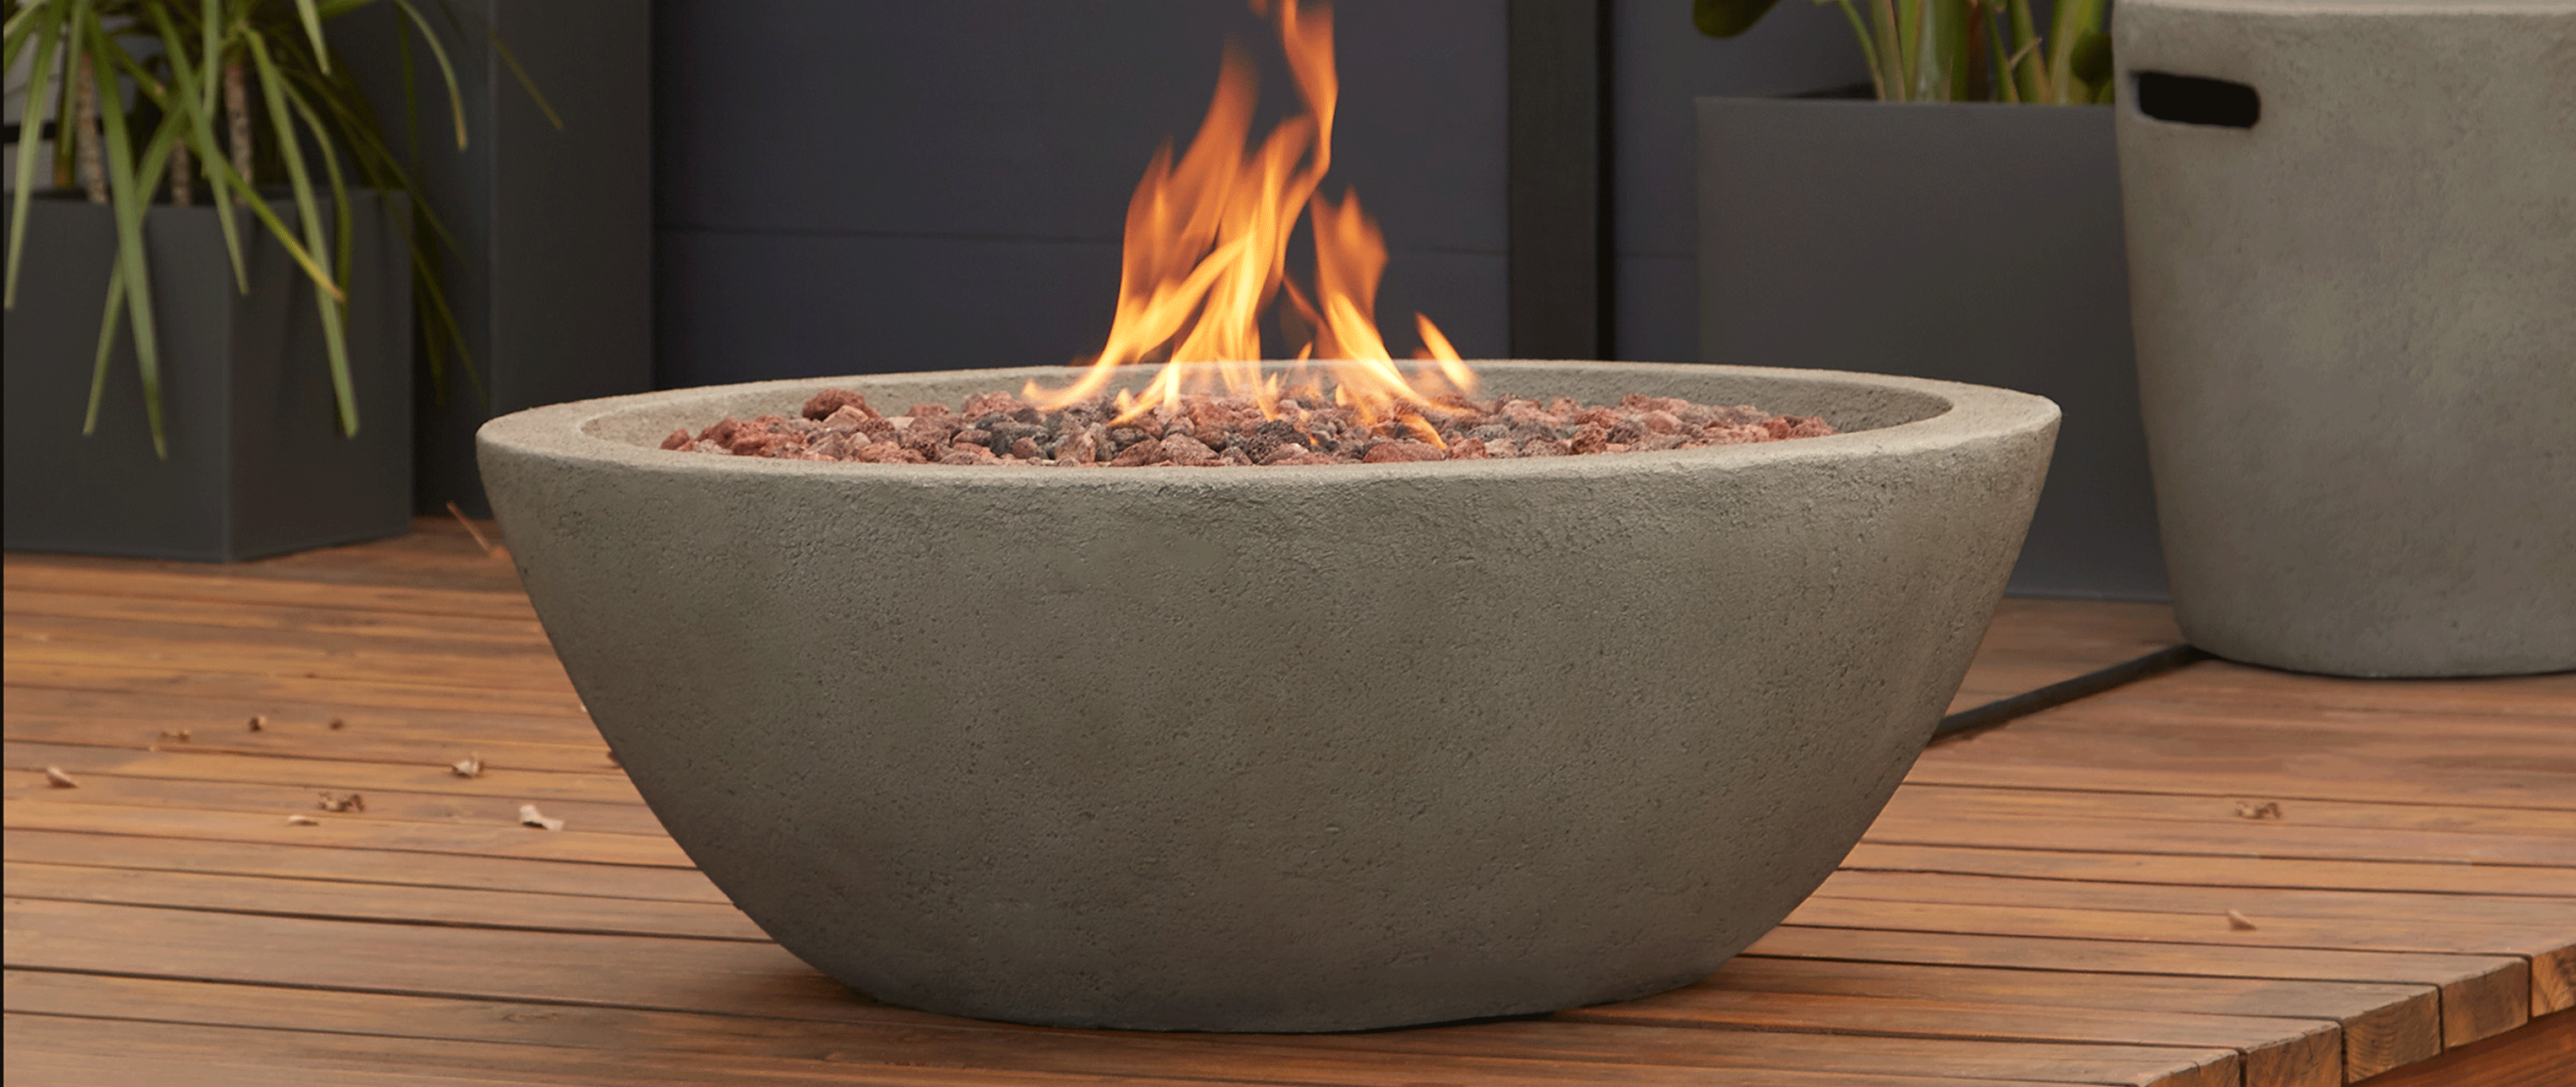 A Gas Fire Pit Can be Used on a Wood Deck